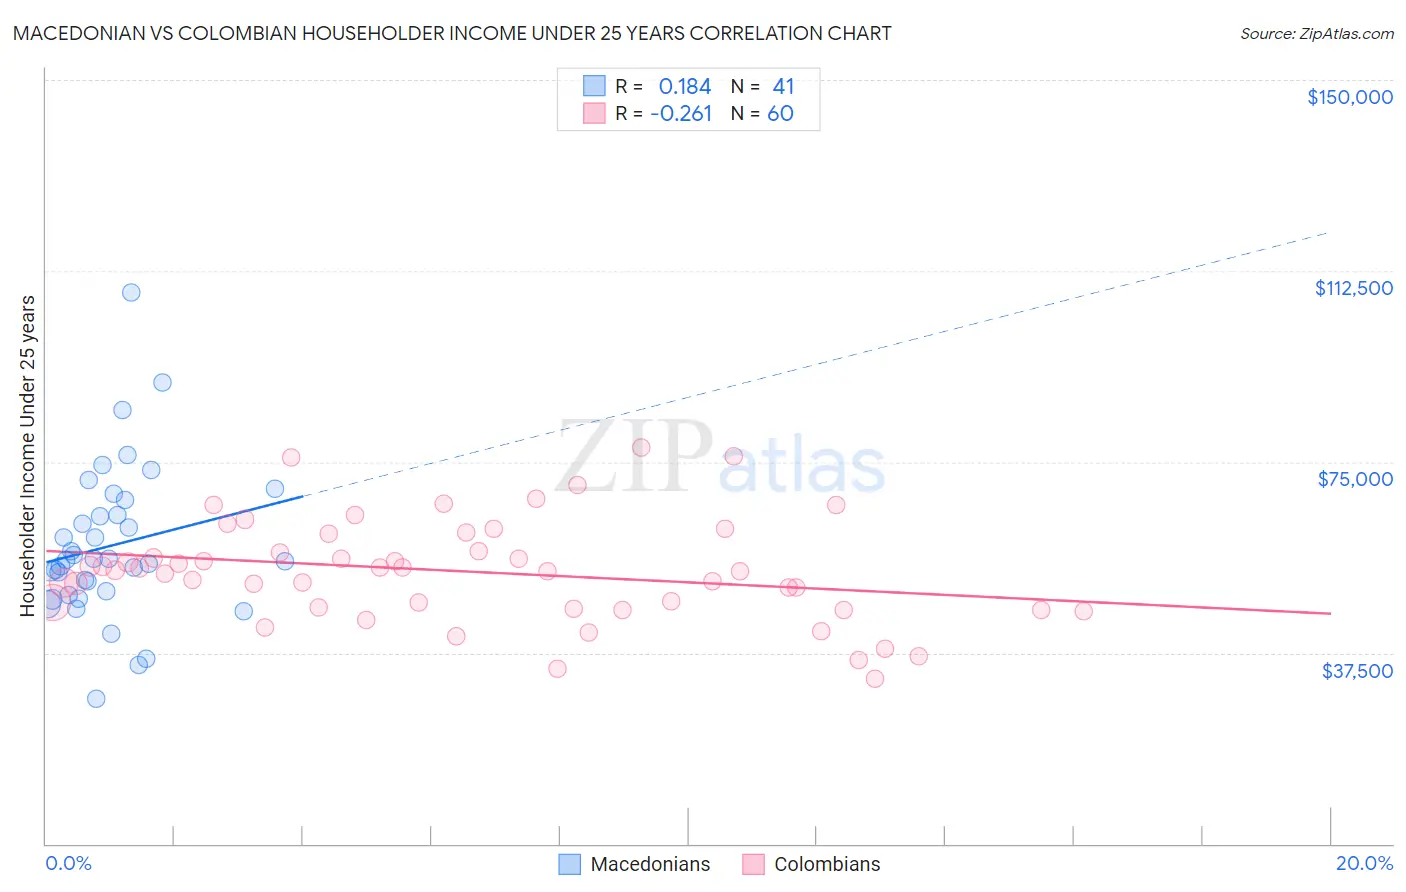 Macedonian vs Colombian Householder Income Under 25 years